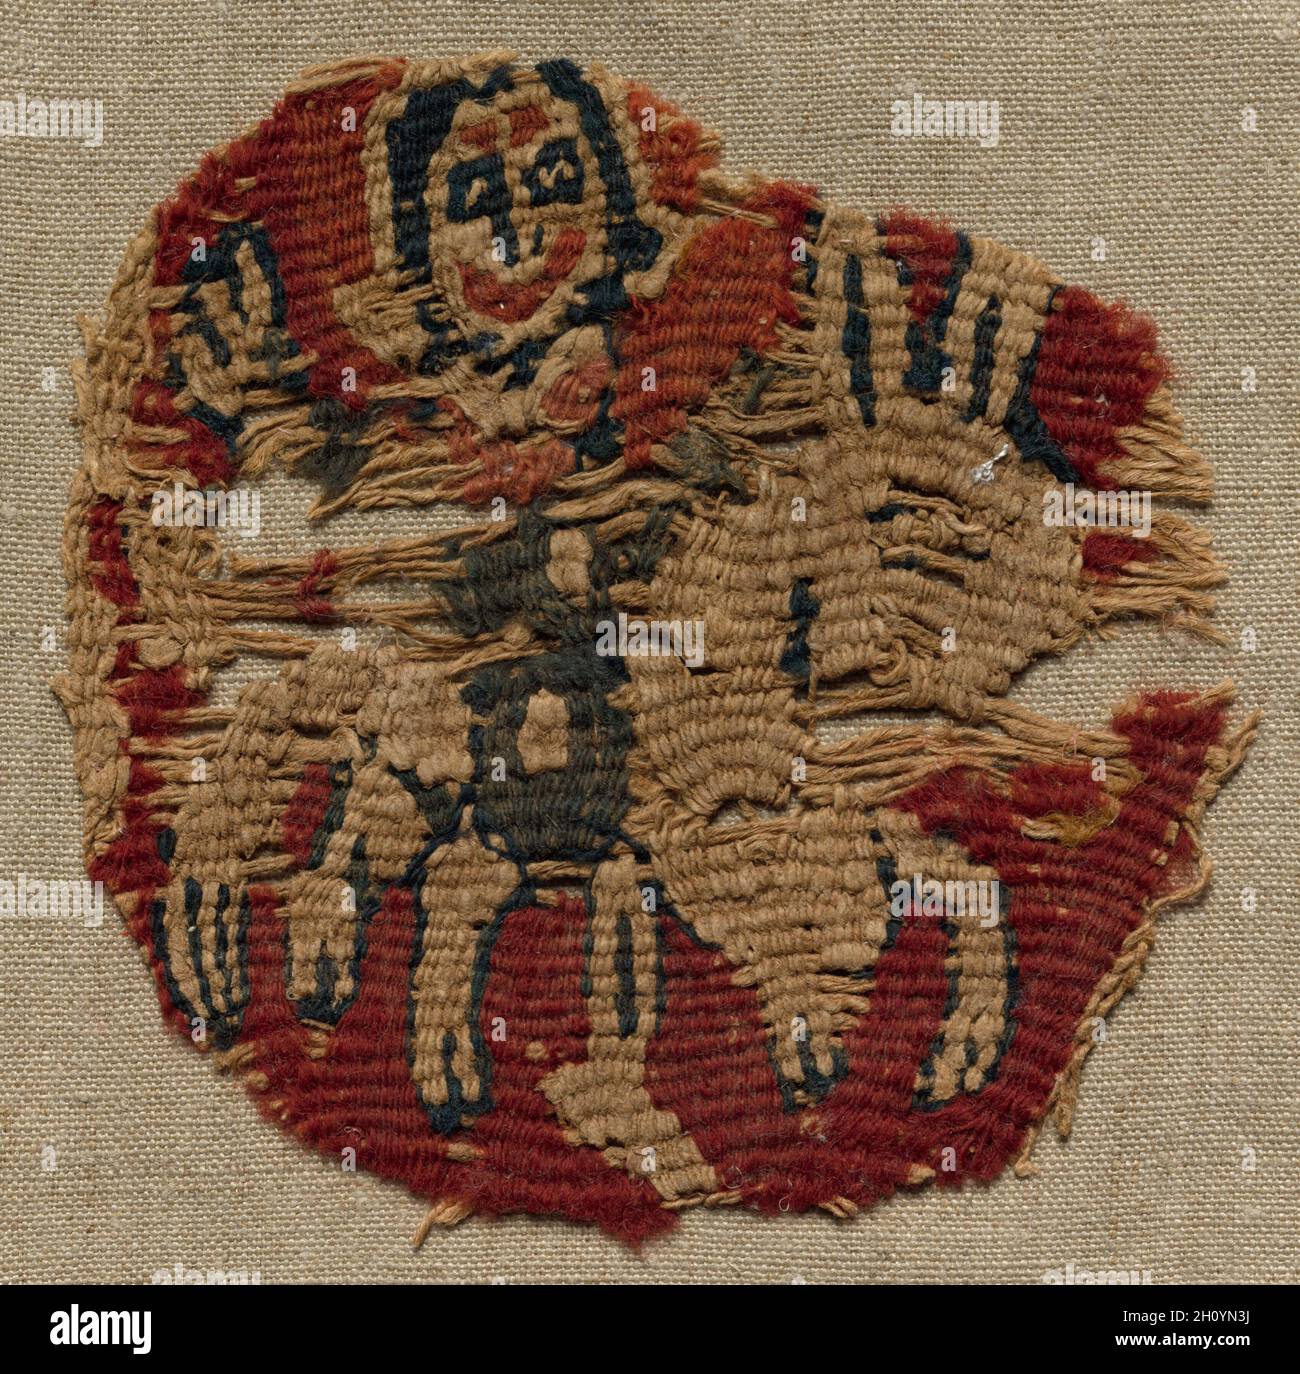 Fragment, Part of an Ornament from a Garment, 800-850. Egypt, late Abbasid period, first half of 9th century. Tapestry weave; wool and linen; overall: 10.5 x 10.7 cm (4 1/8 x 4 3/16 in.). Stock Photo